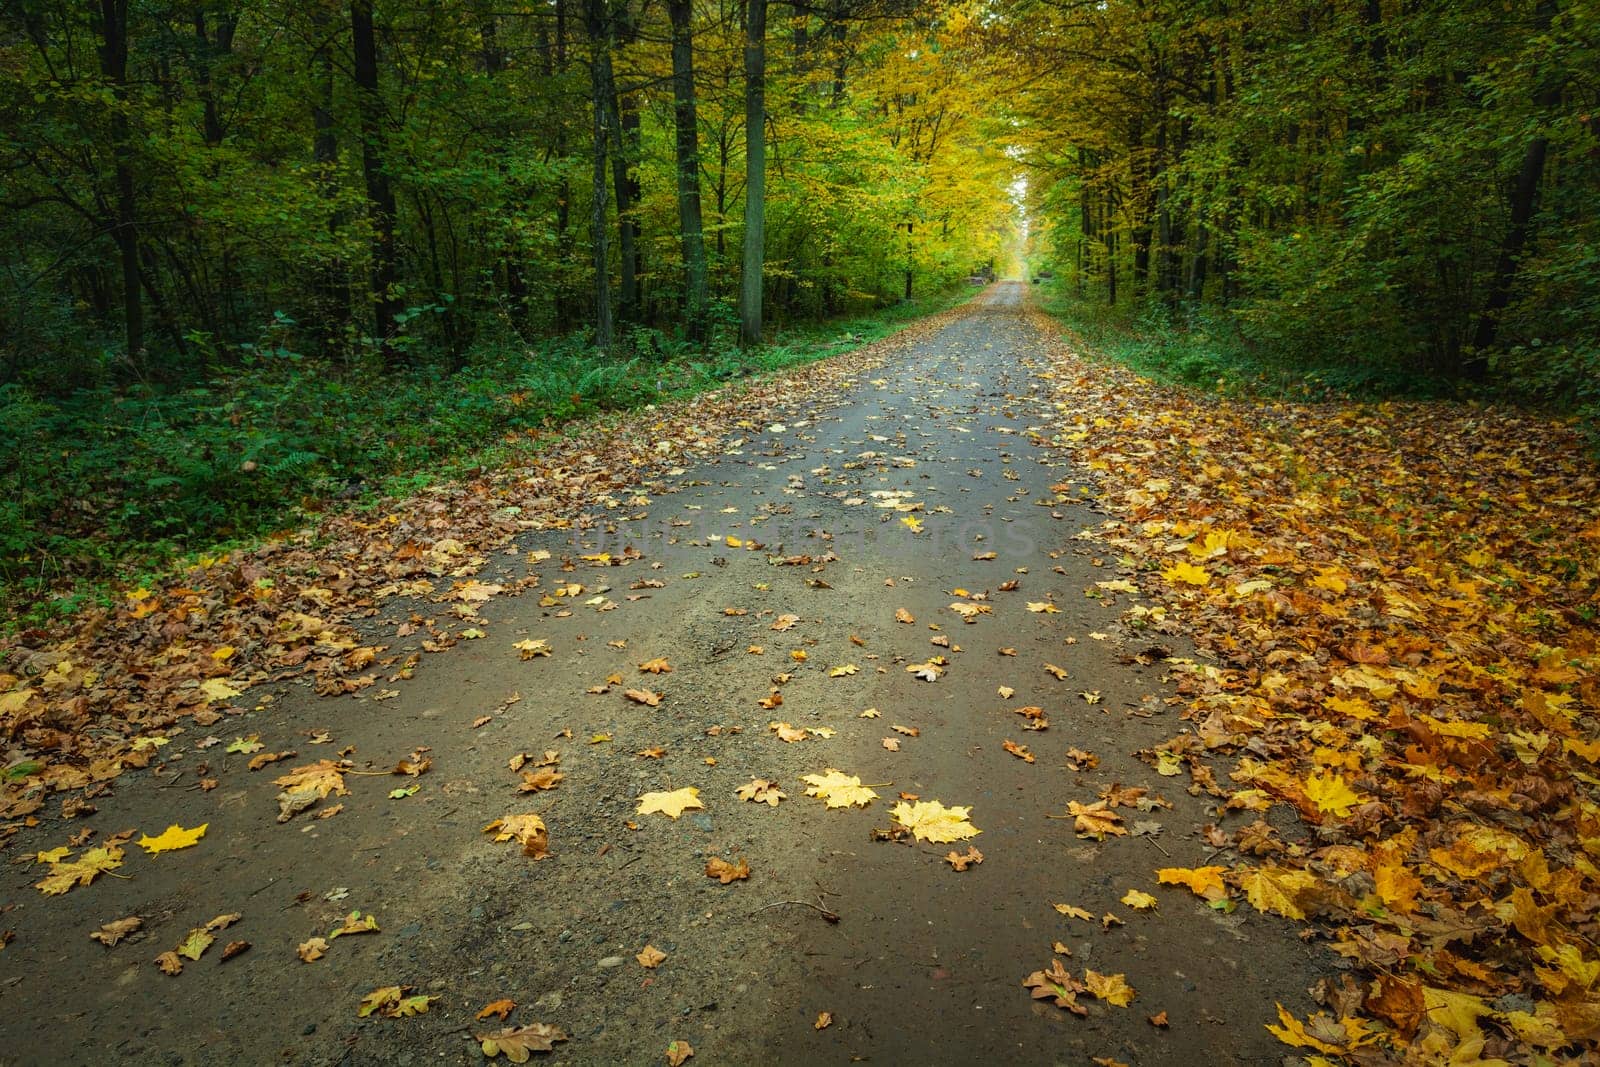 Fallen yellow leaves on dirt road in the forest, October day